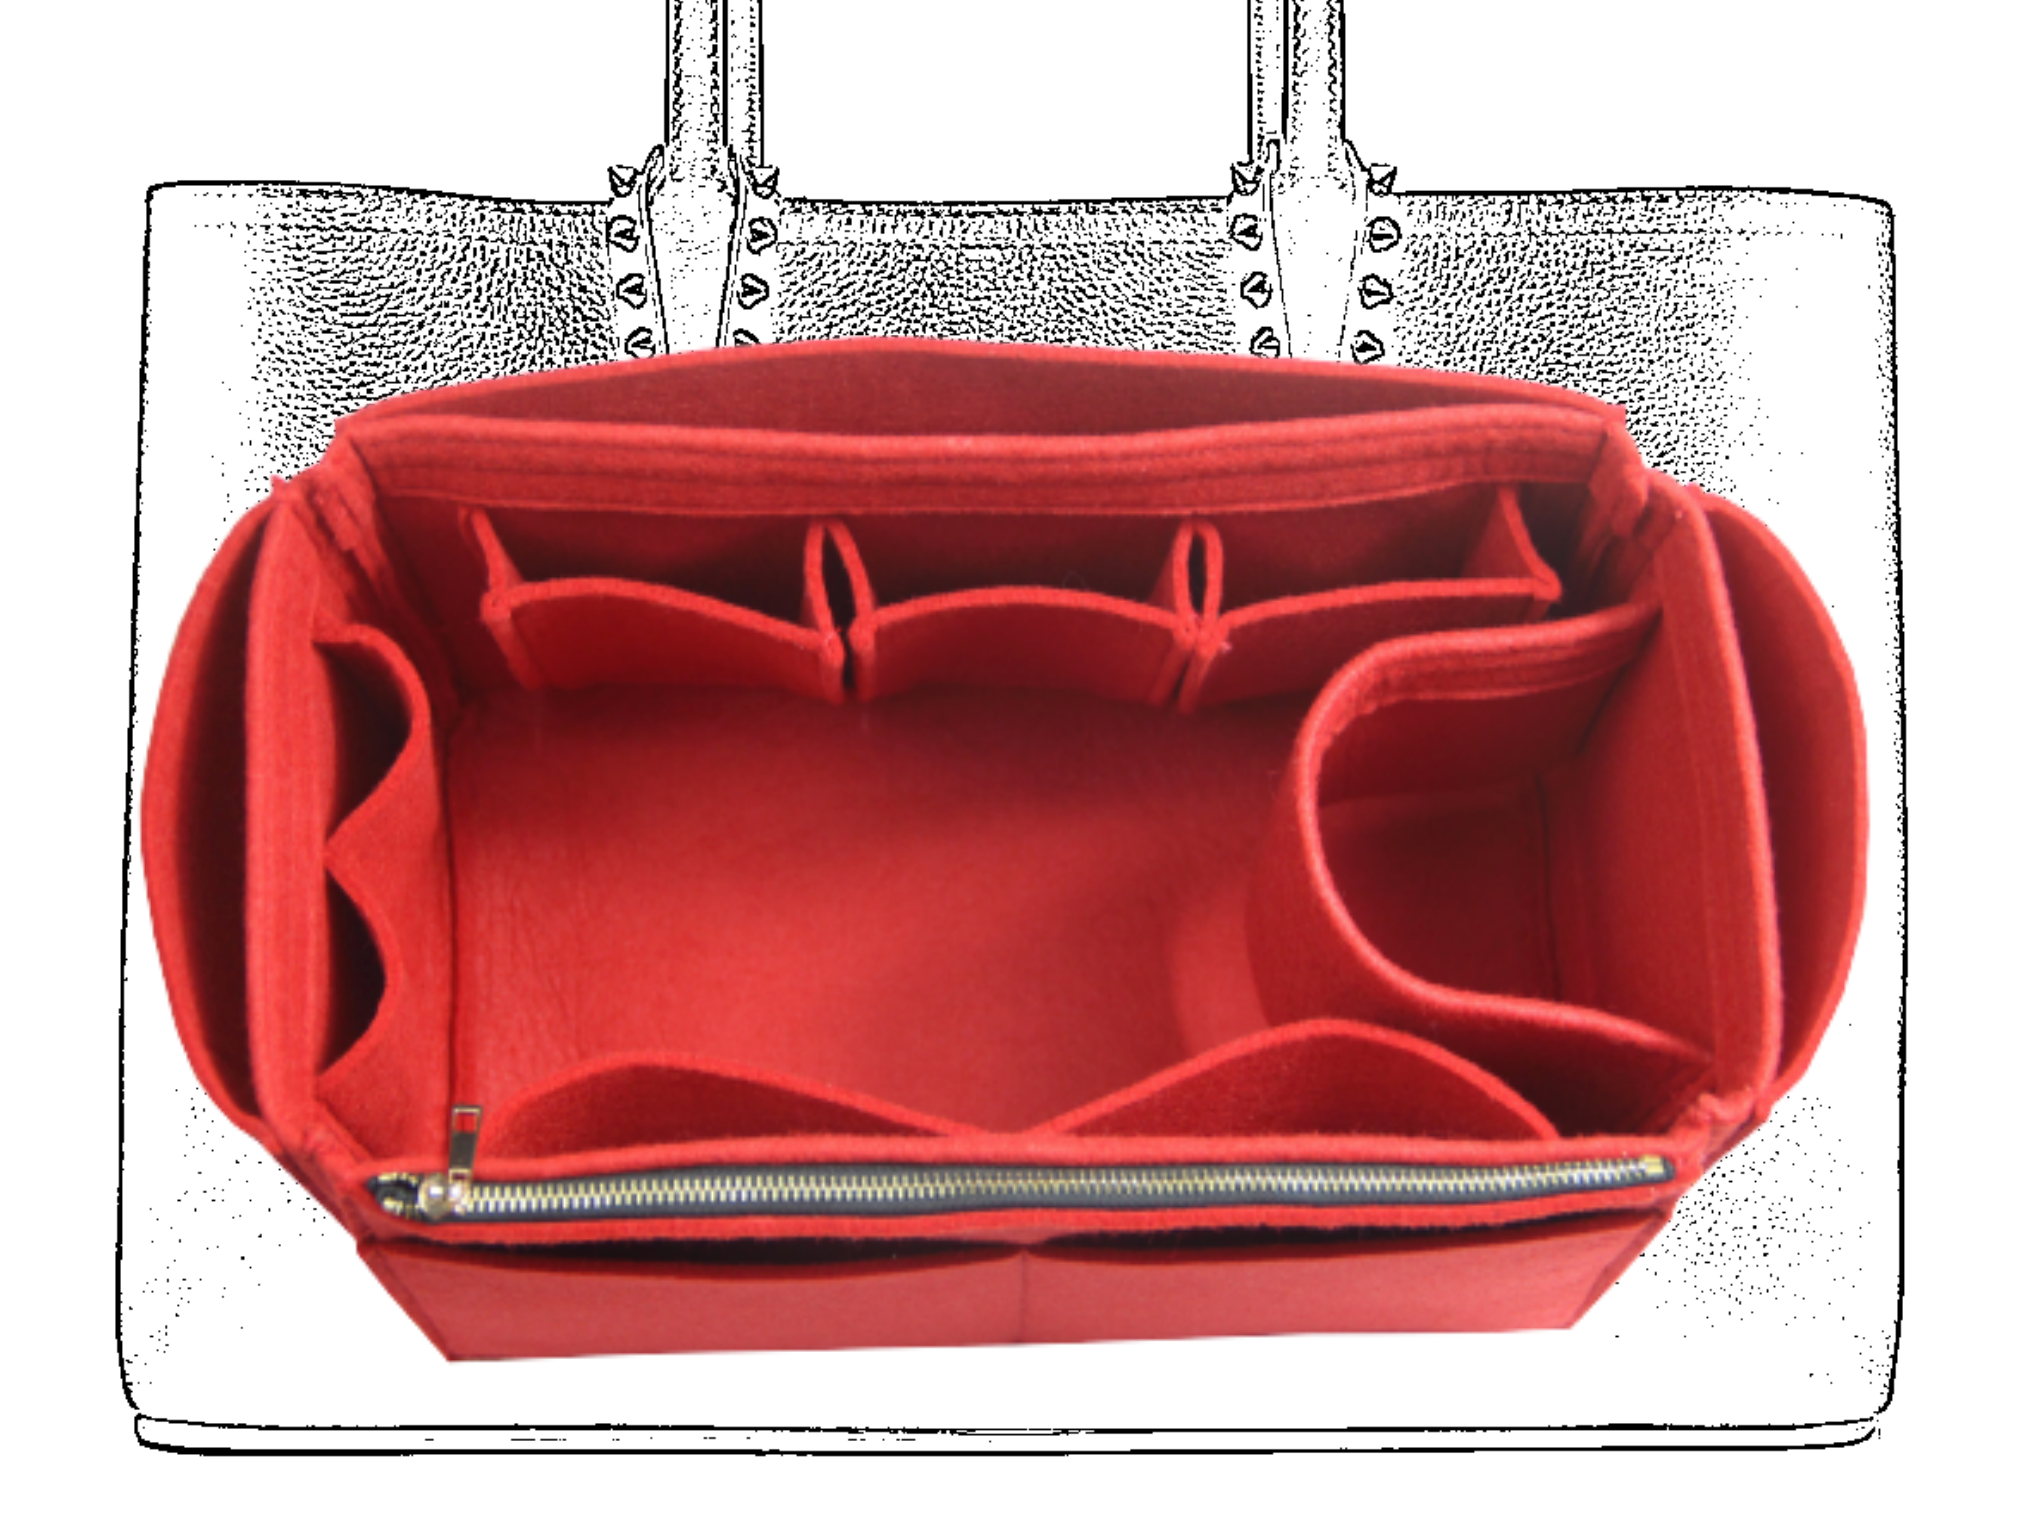 For [Onthego MM] Liner Insert Organizer On The Go OTG (Curved Sides)